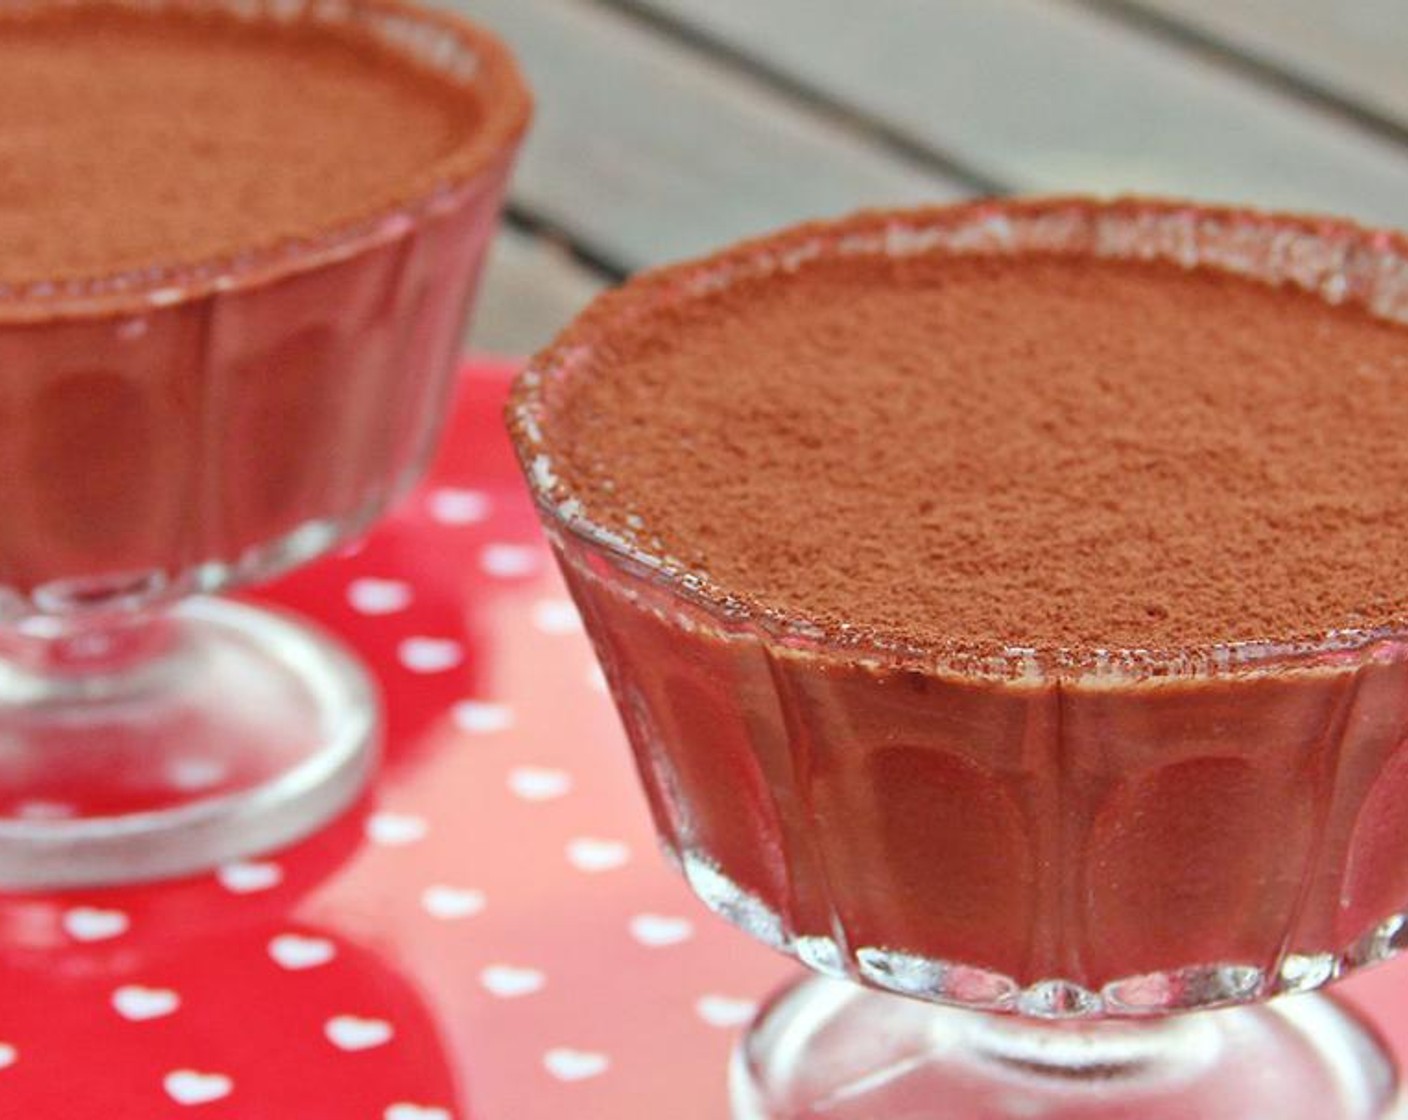 Chocolate Peanut Butter Mousse